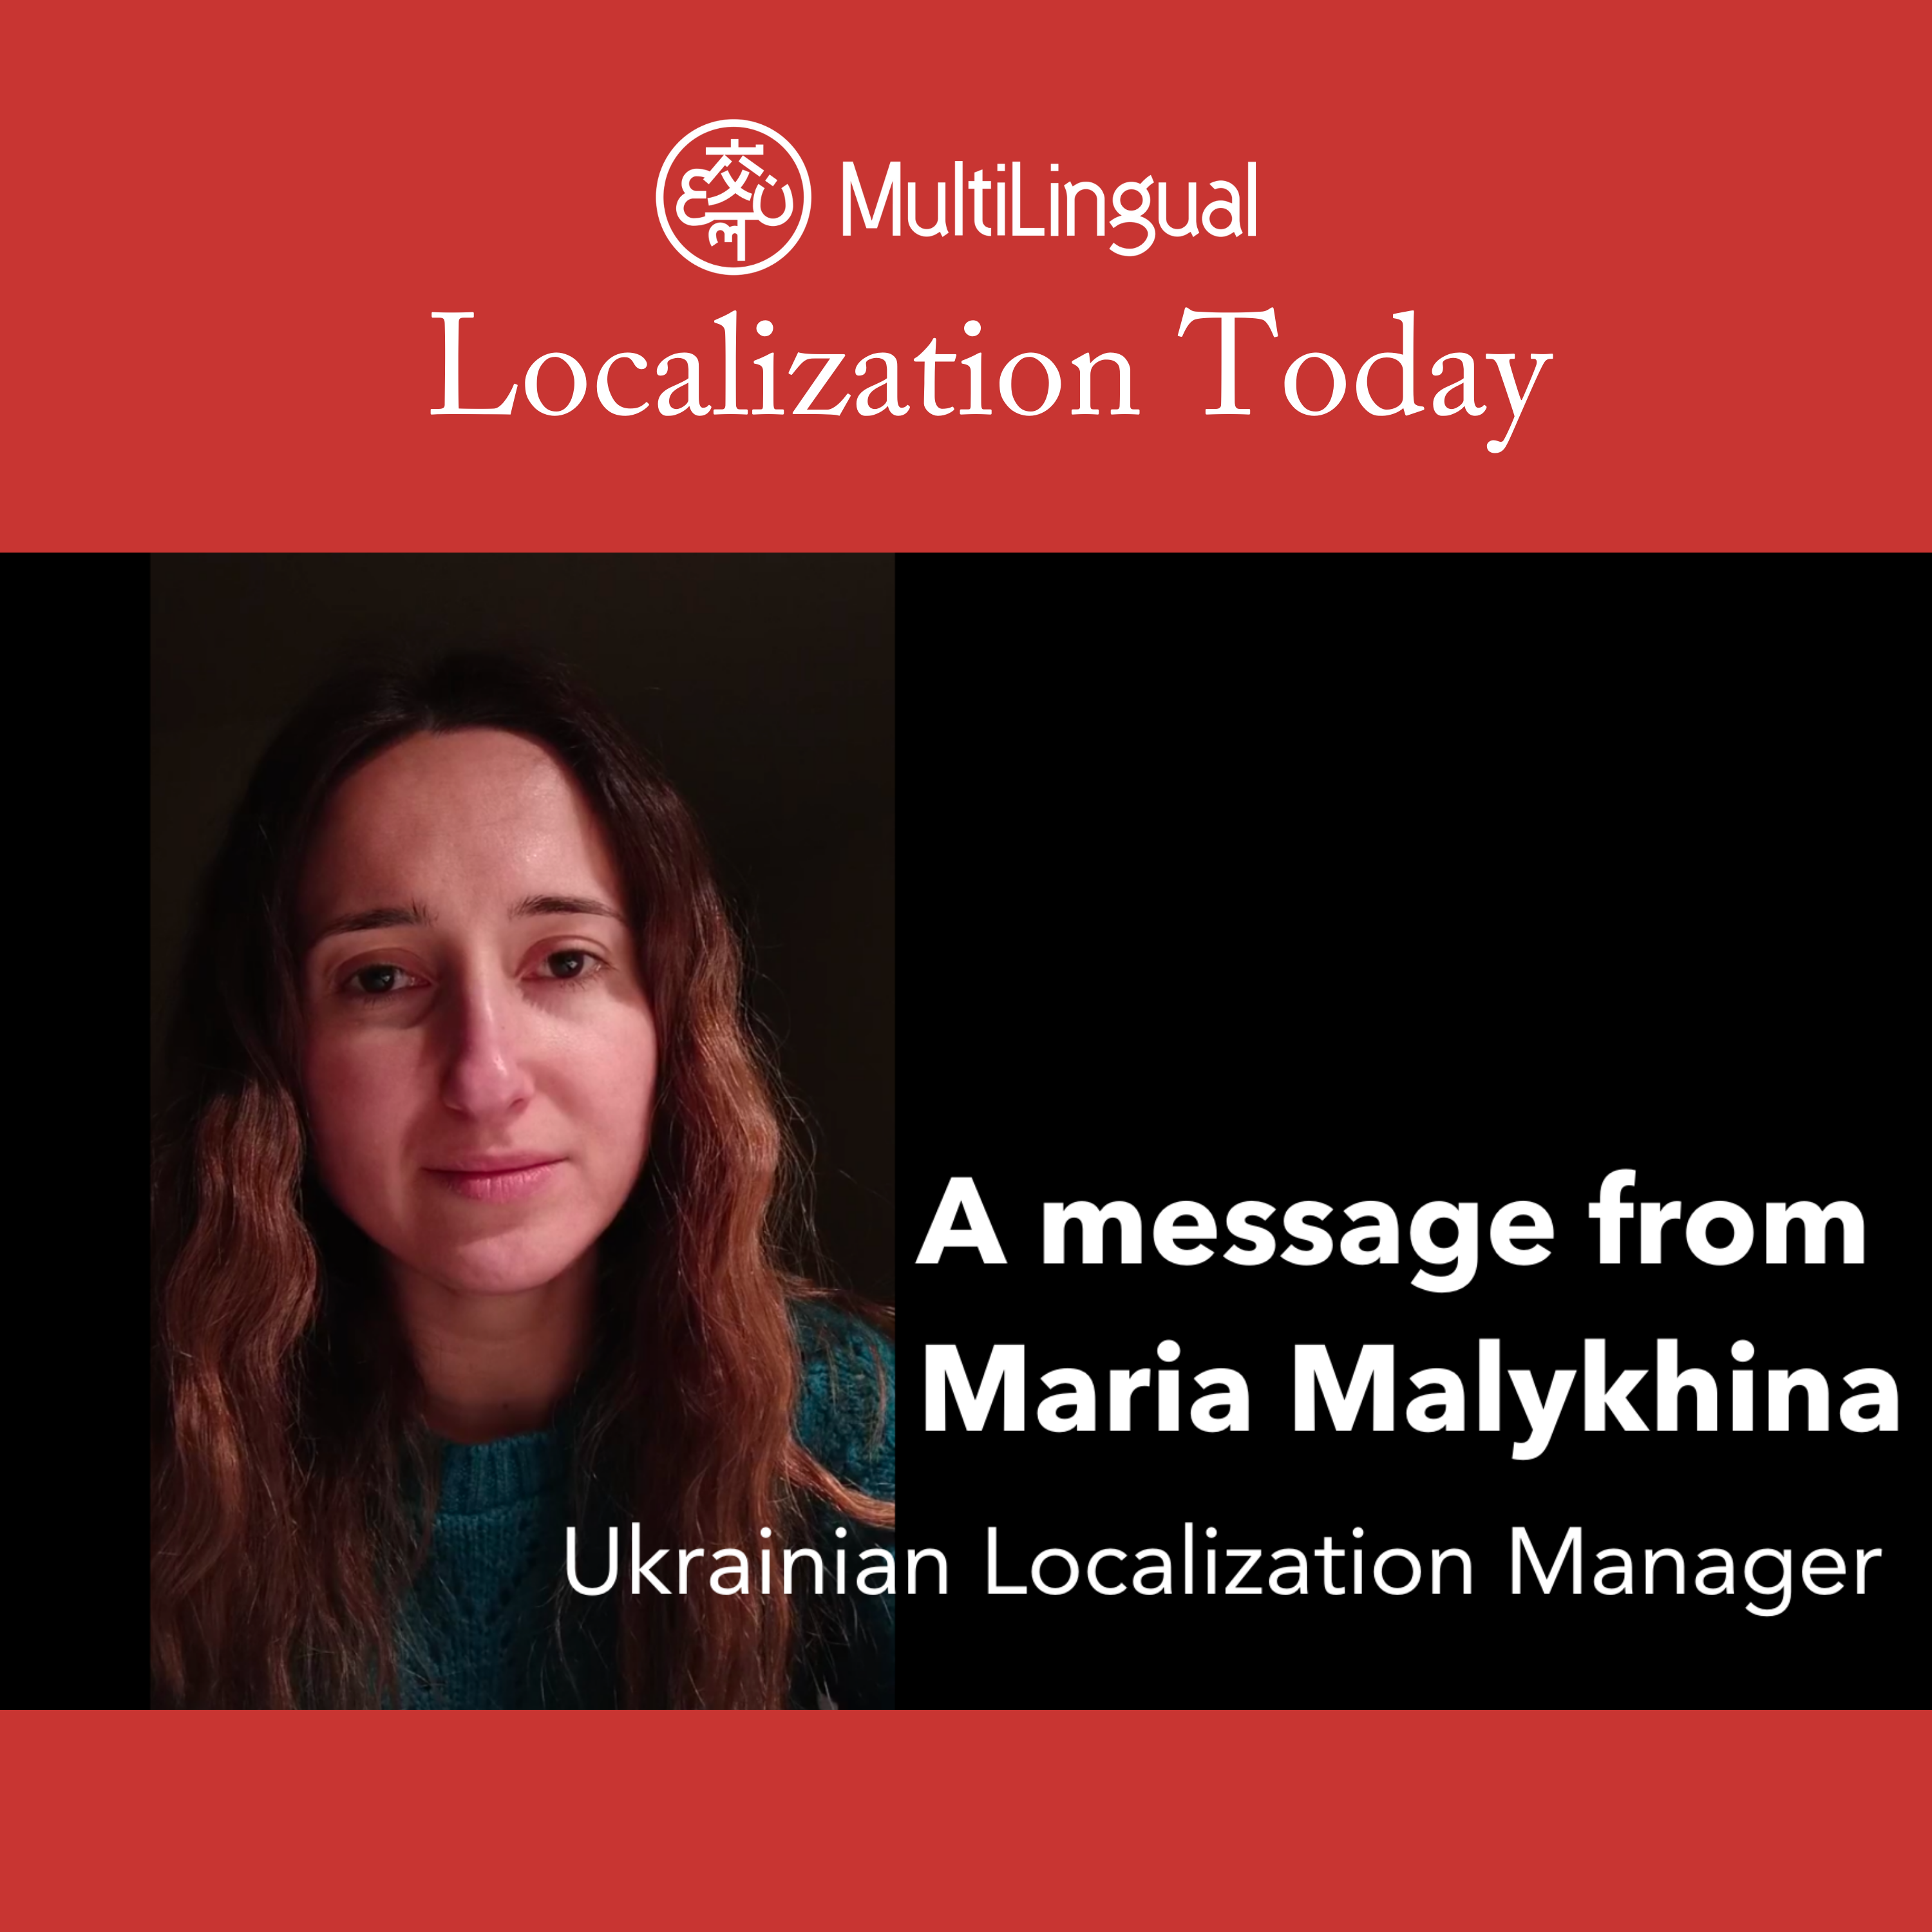 Working in a warzone: LSP manager Maria Malykhina shares her story